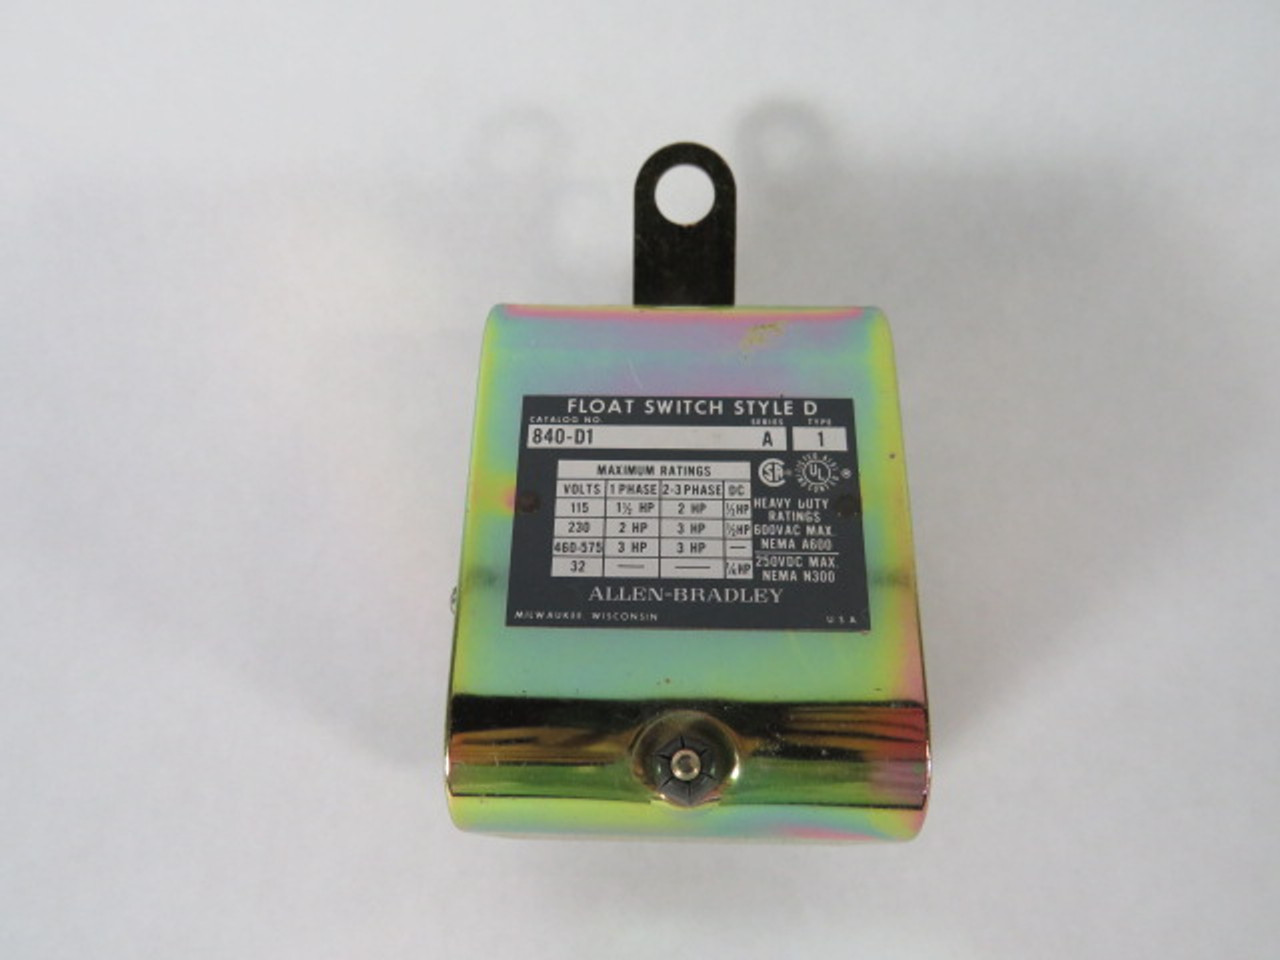 Allen-Bradley 840-D1 Float Switch Style D 600VAC 250VDC Series A Type 1 USED